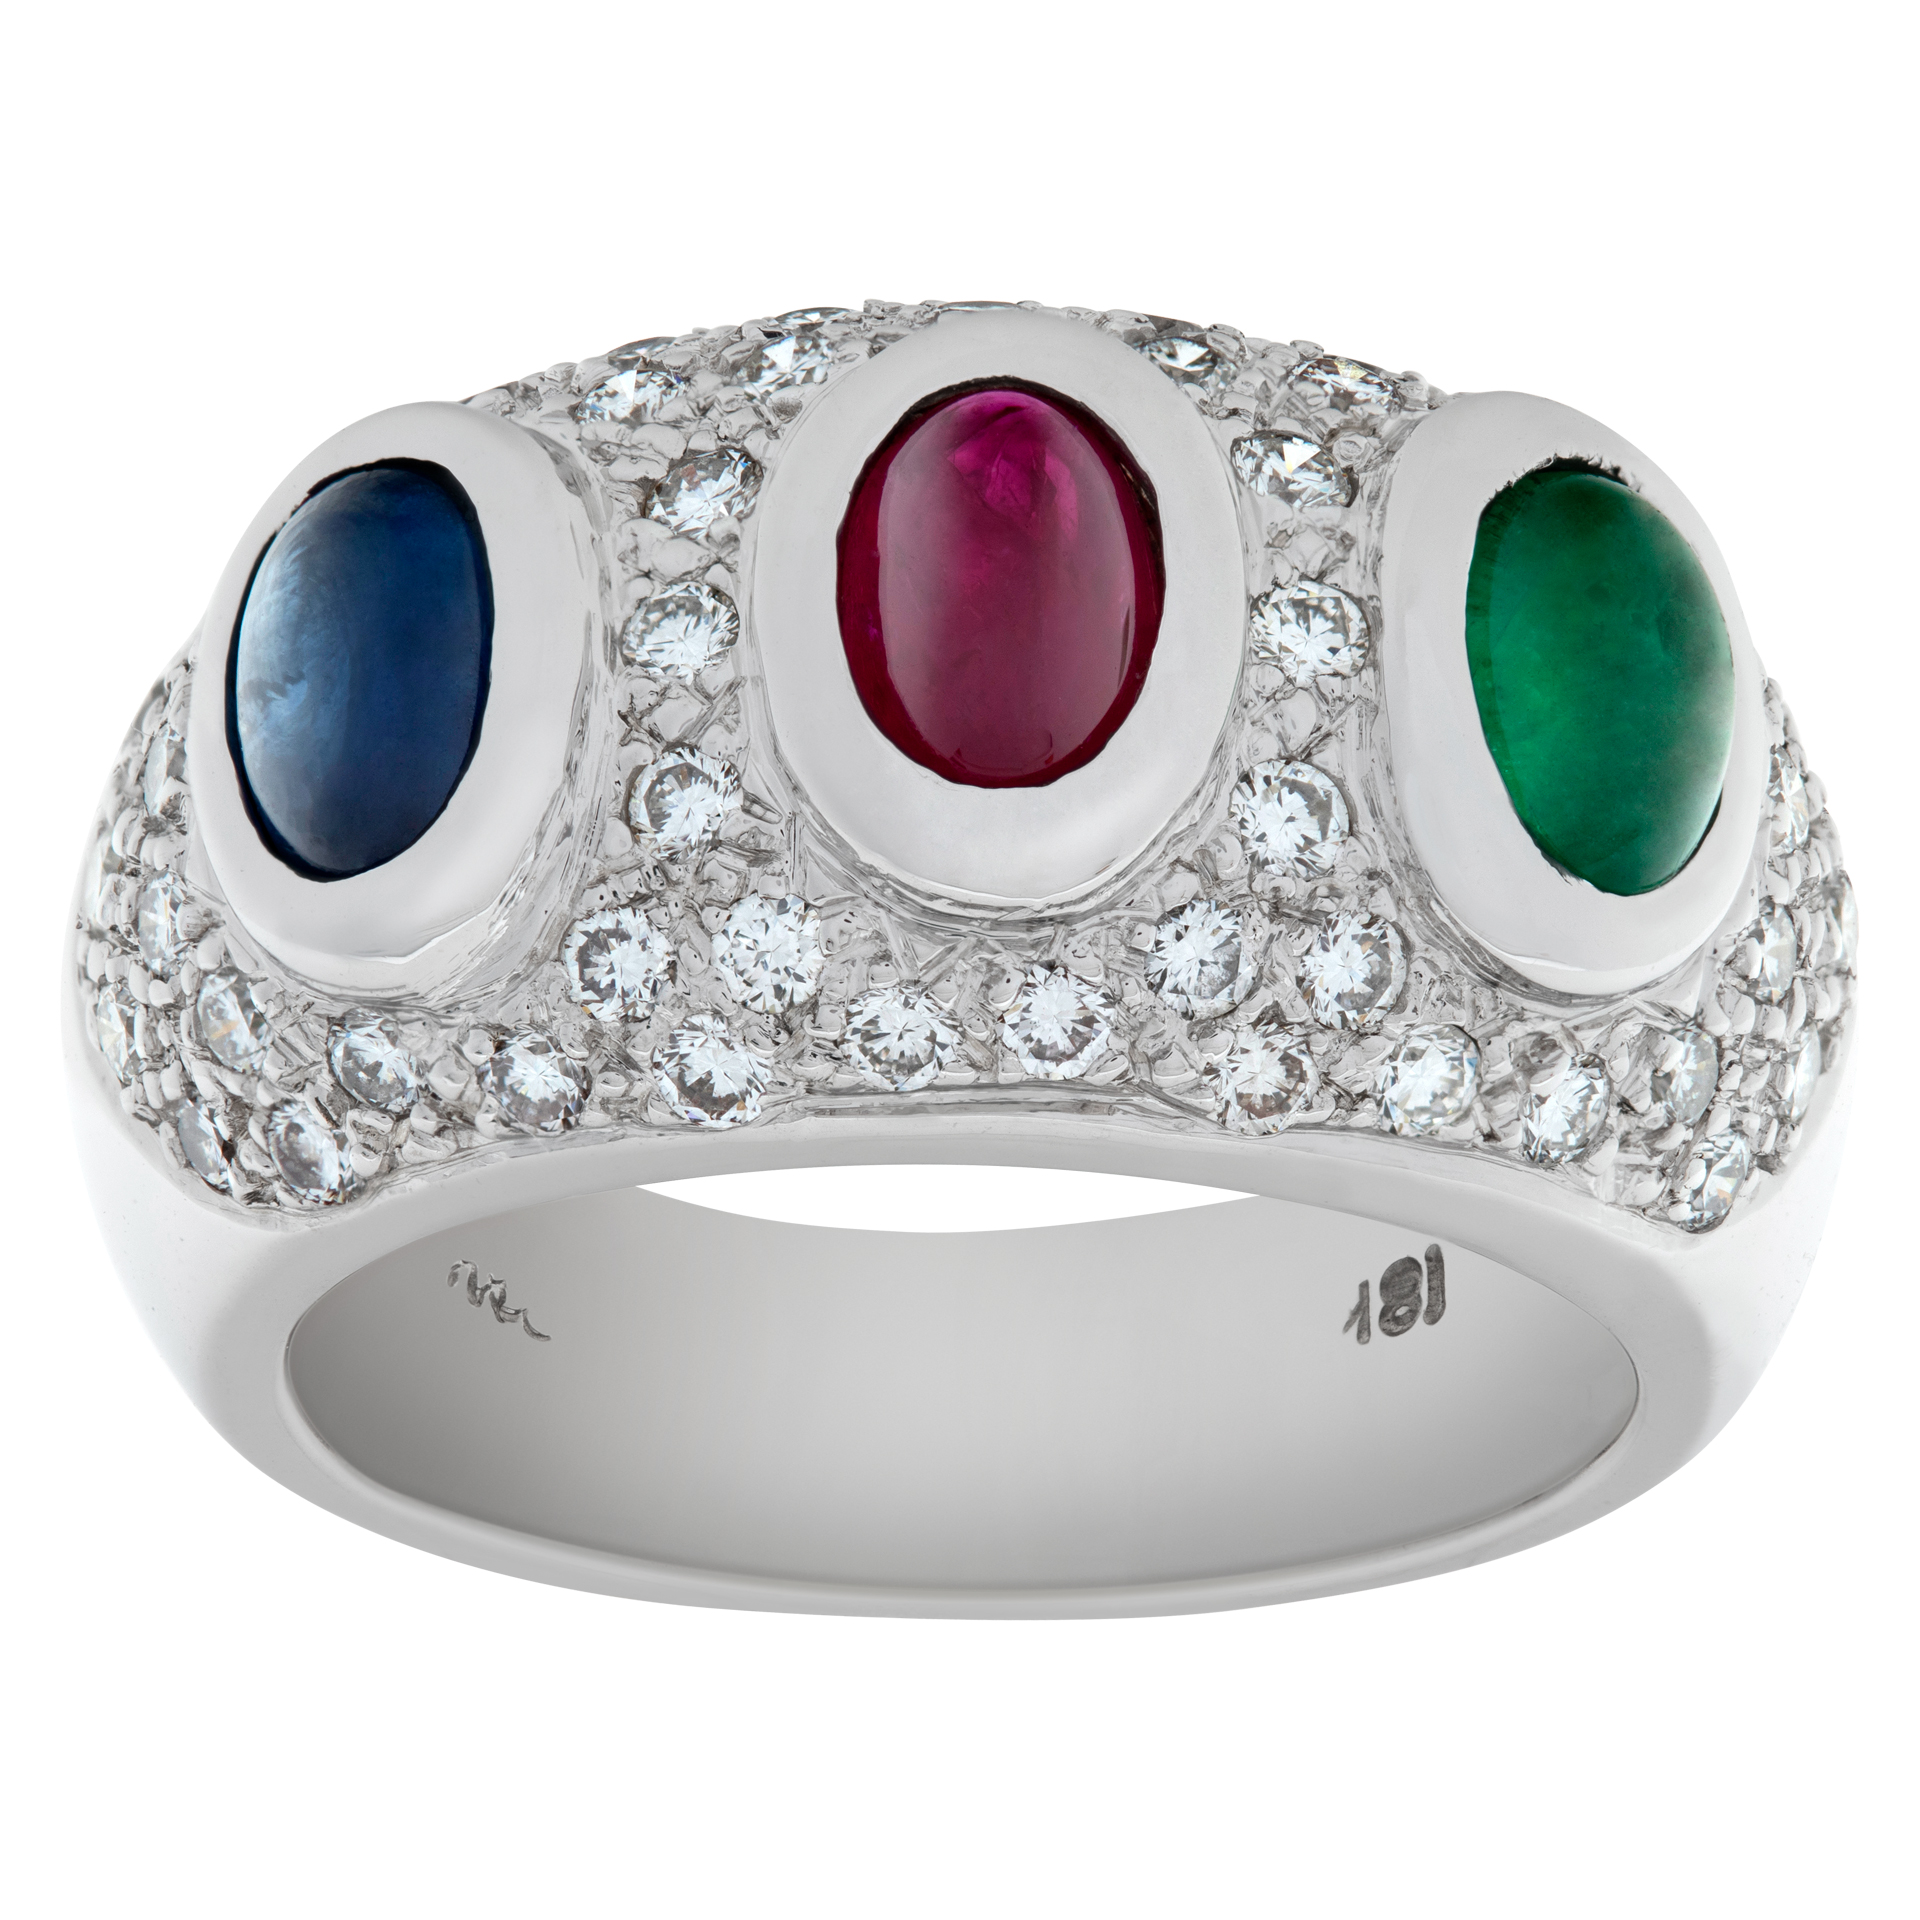 Pave diamond ring with cabochon sapphire ruby & emerald in 18k white gold